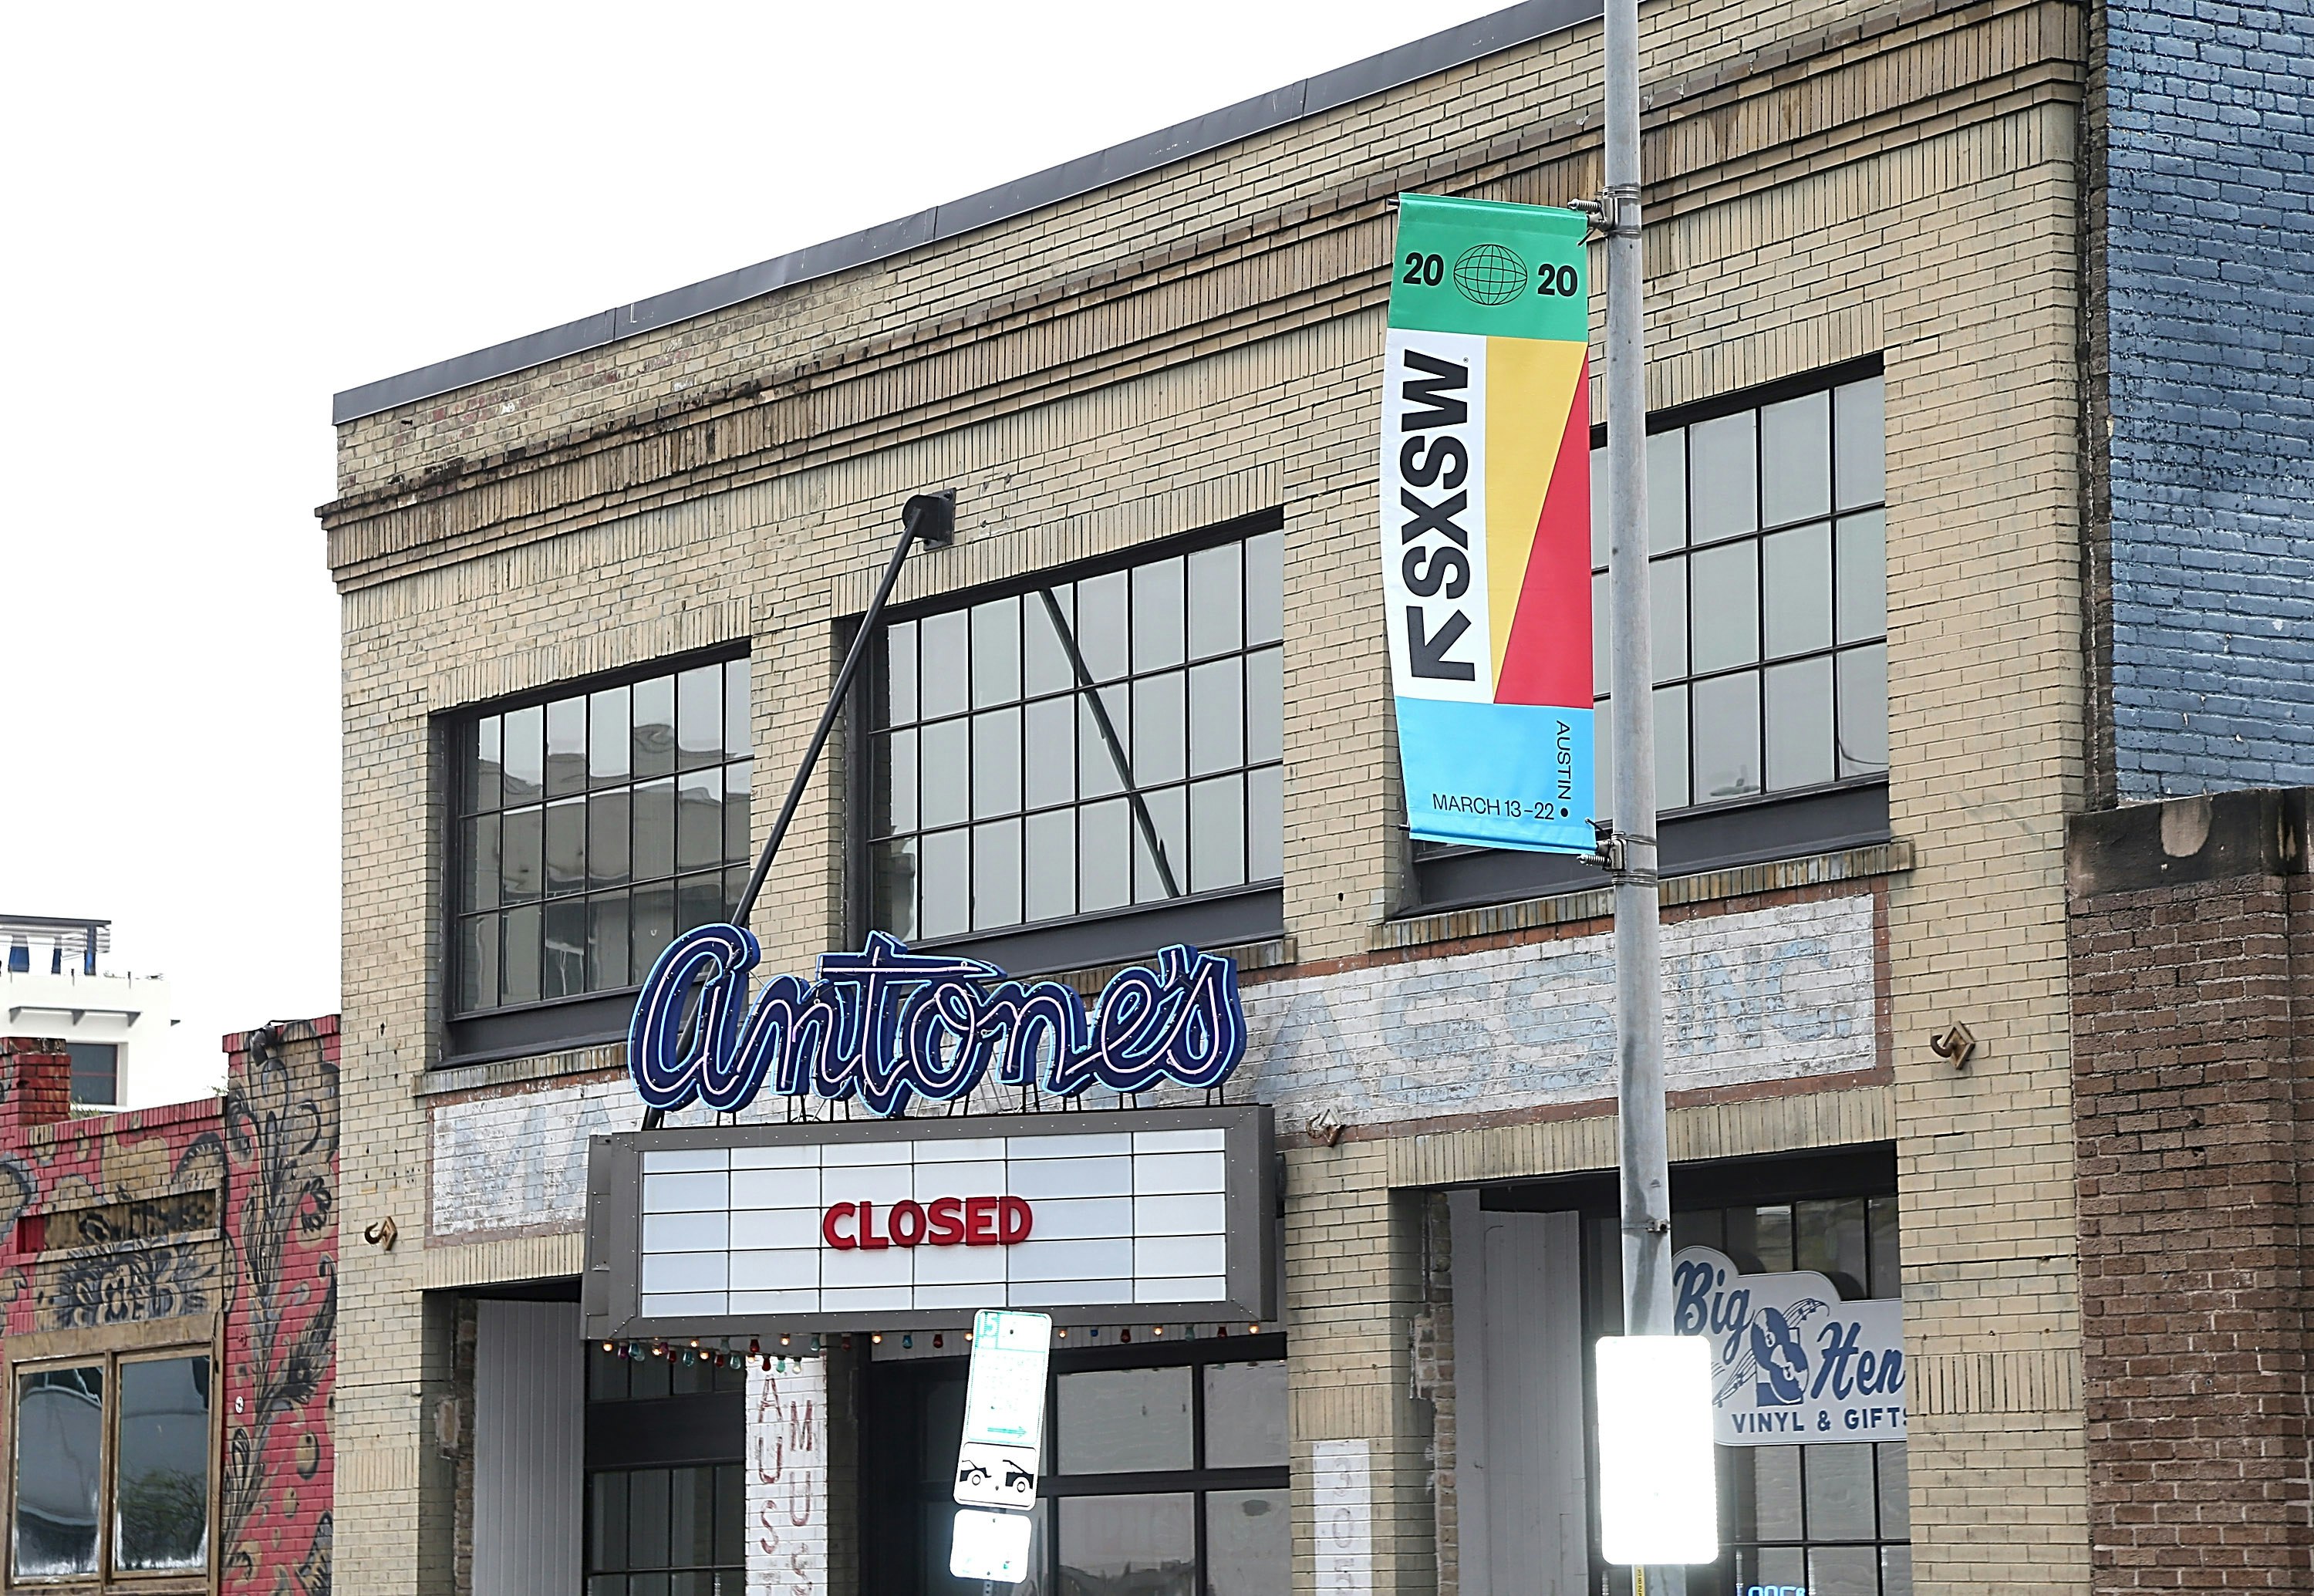 A cinema with a sign reading "closed" next to a banner for the SXSW festival